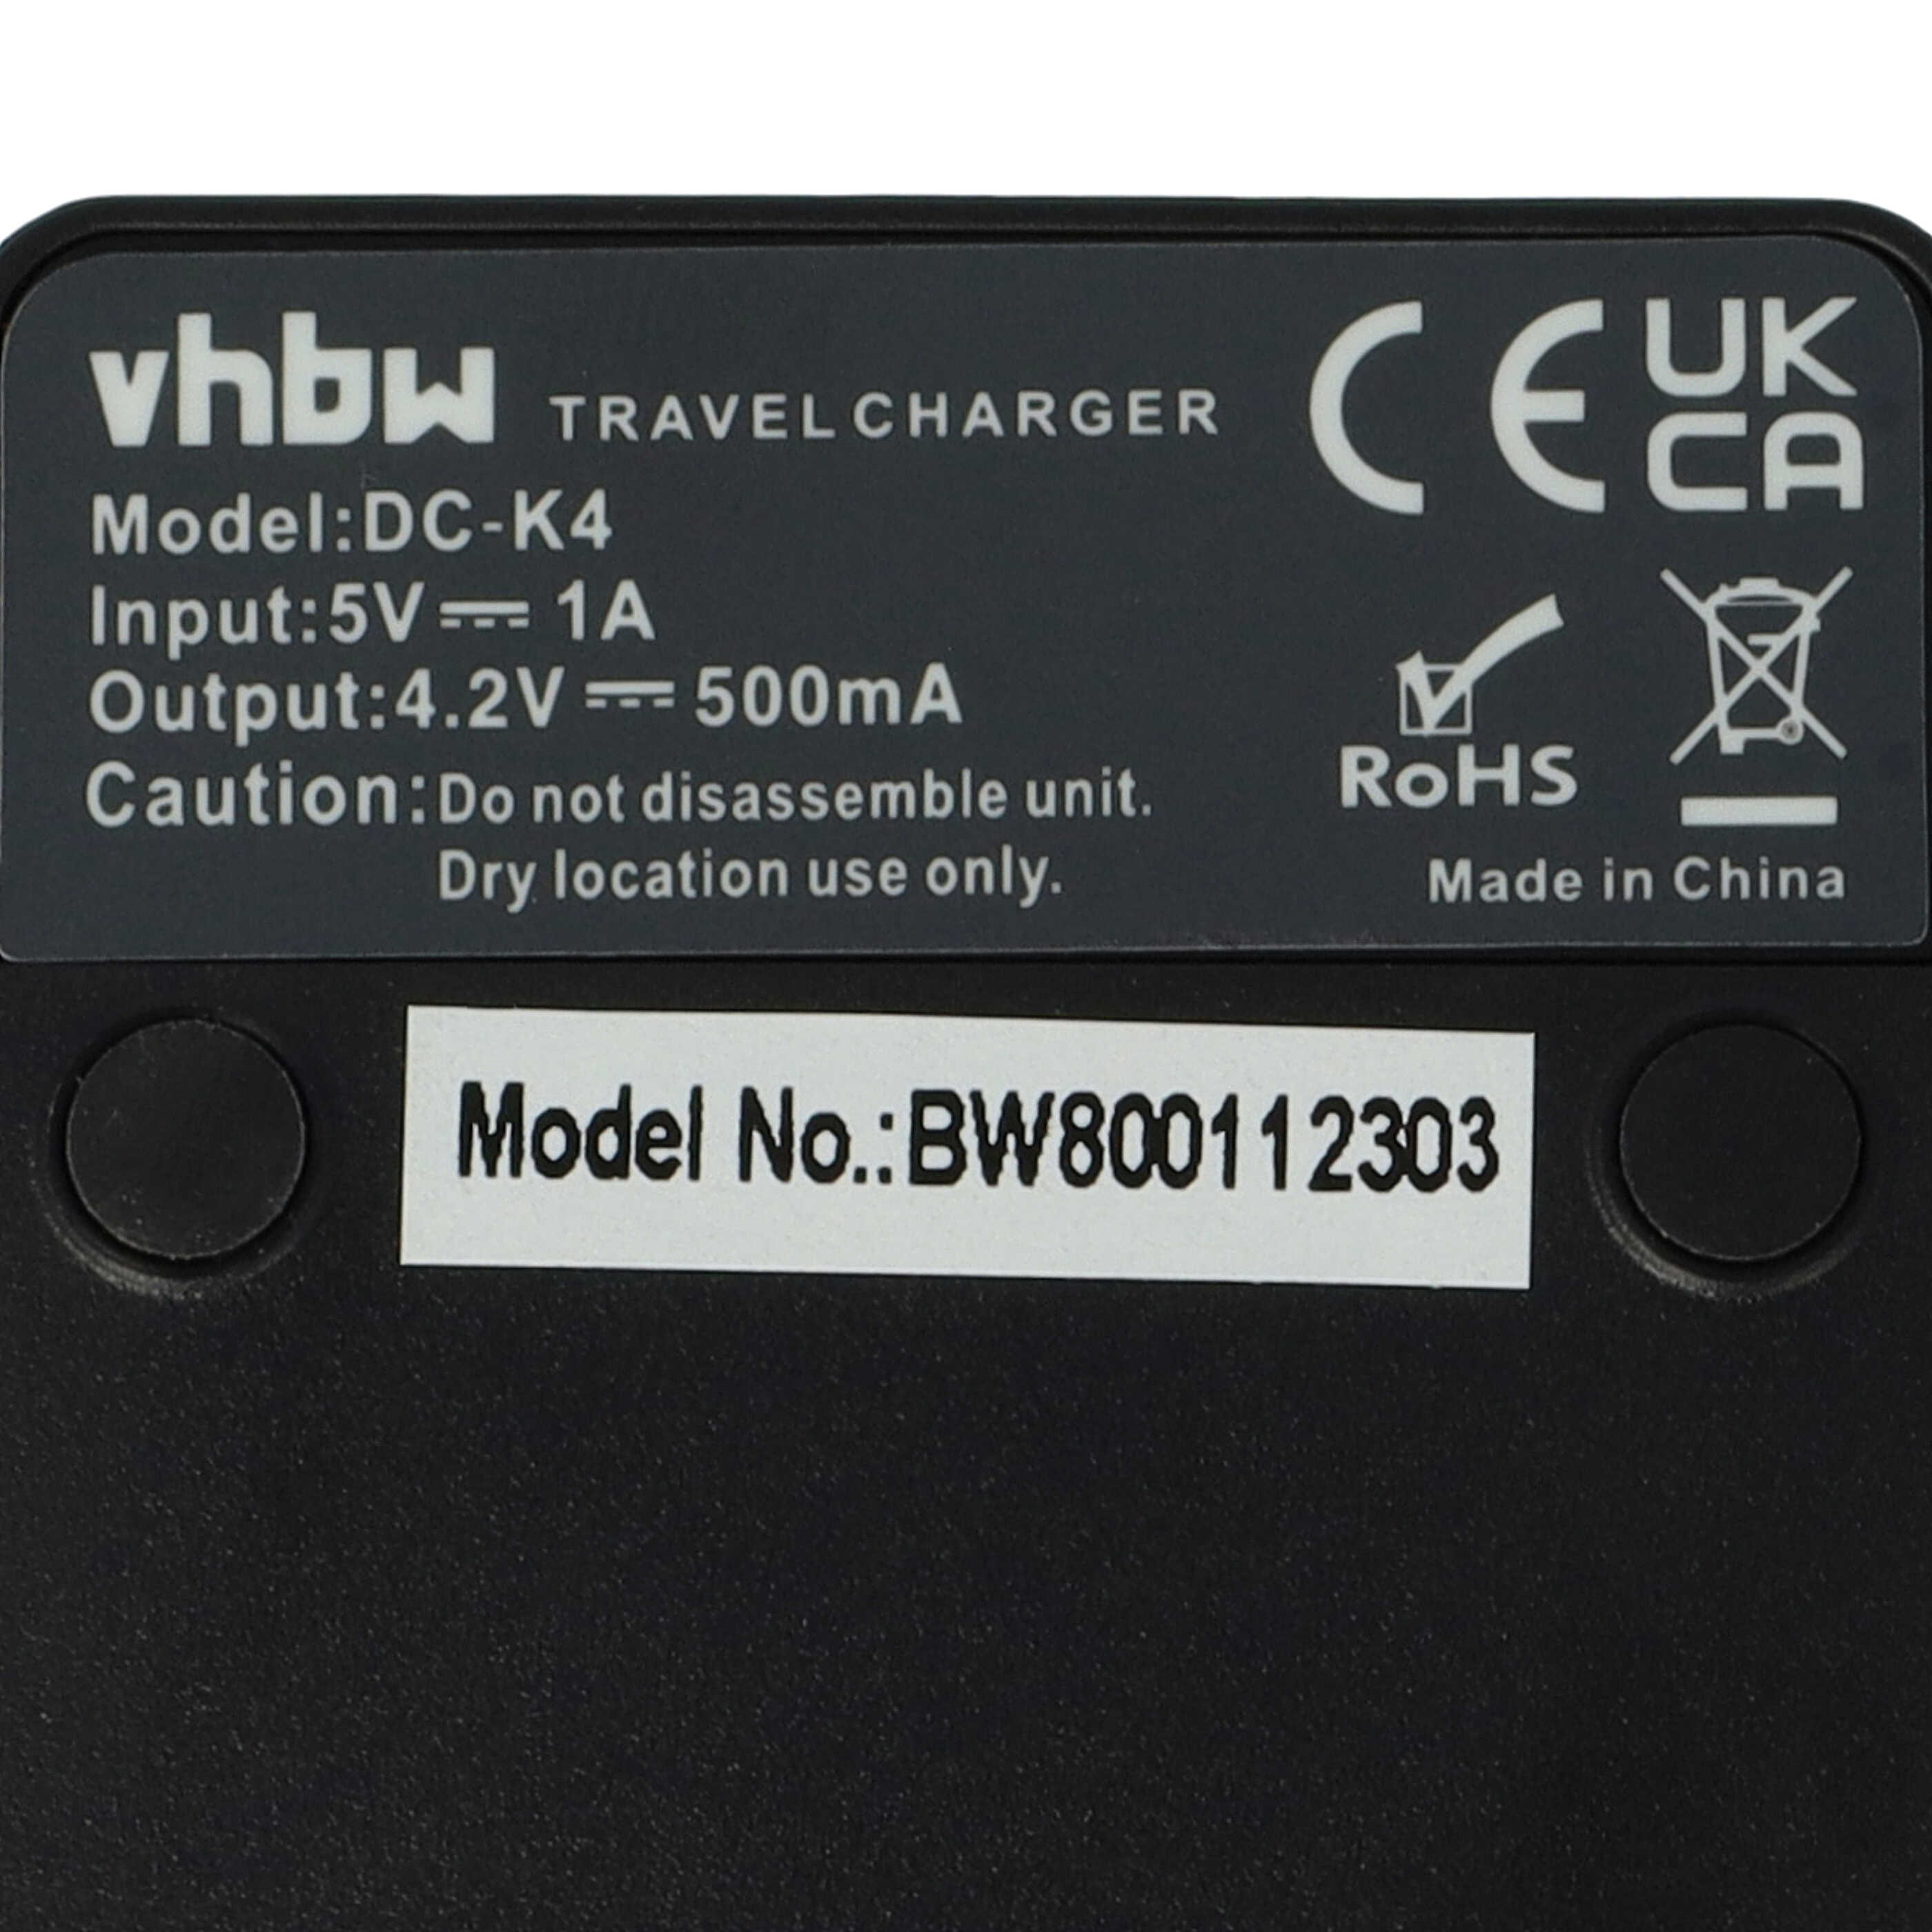 Battery Charger replaces Olympus LI-10C suitable for Sanyo DB-L10 Camera etc. - 0.5 A, 4.2 V